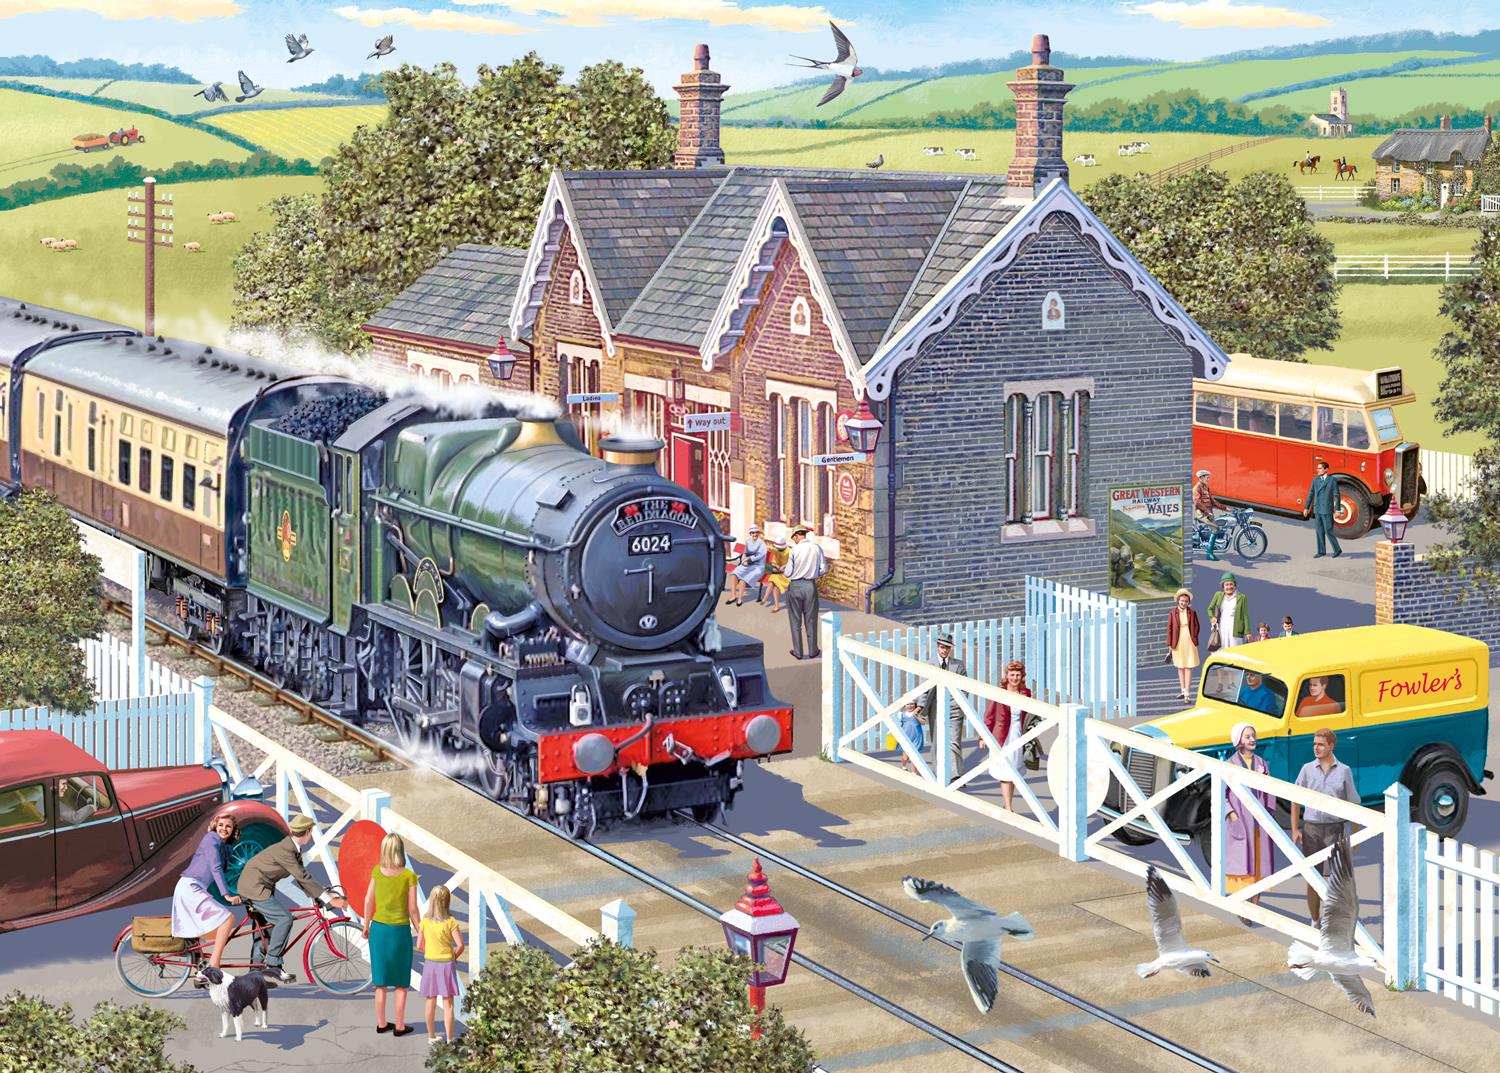 Otter House Village Station Jigsaw Puzzle (1000 Pieces)